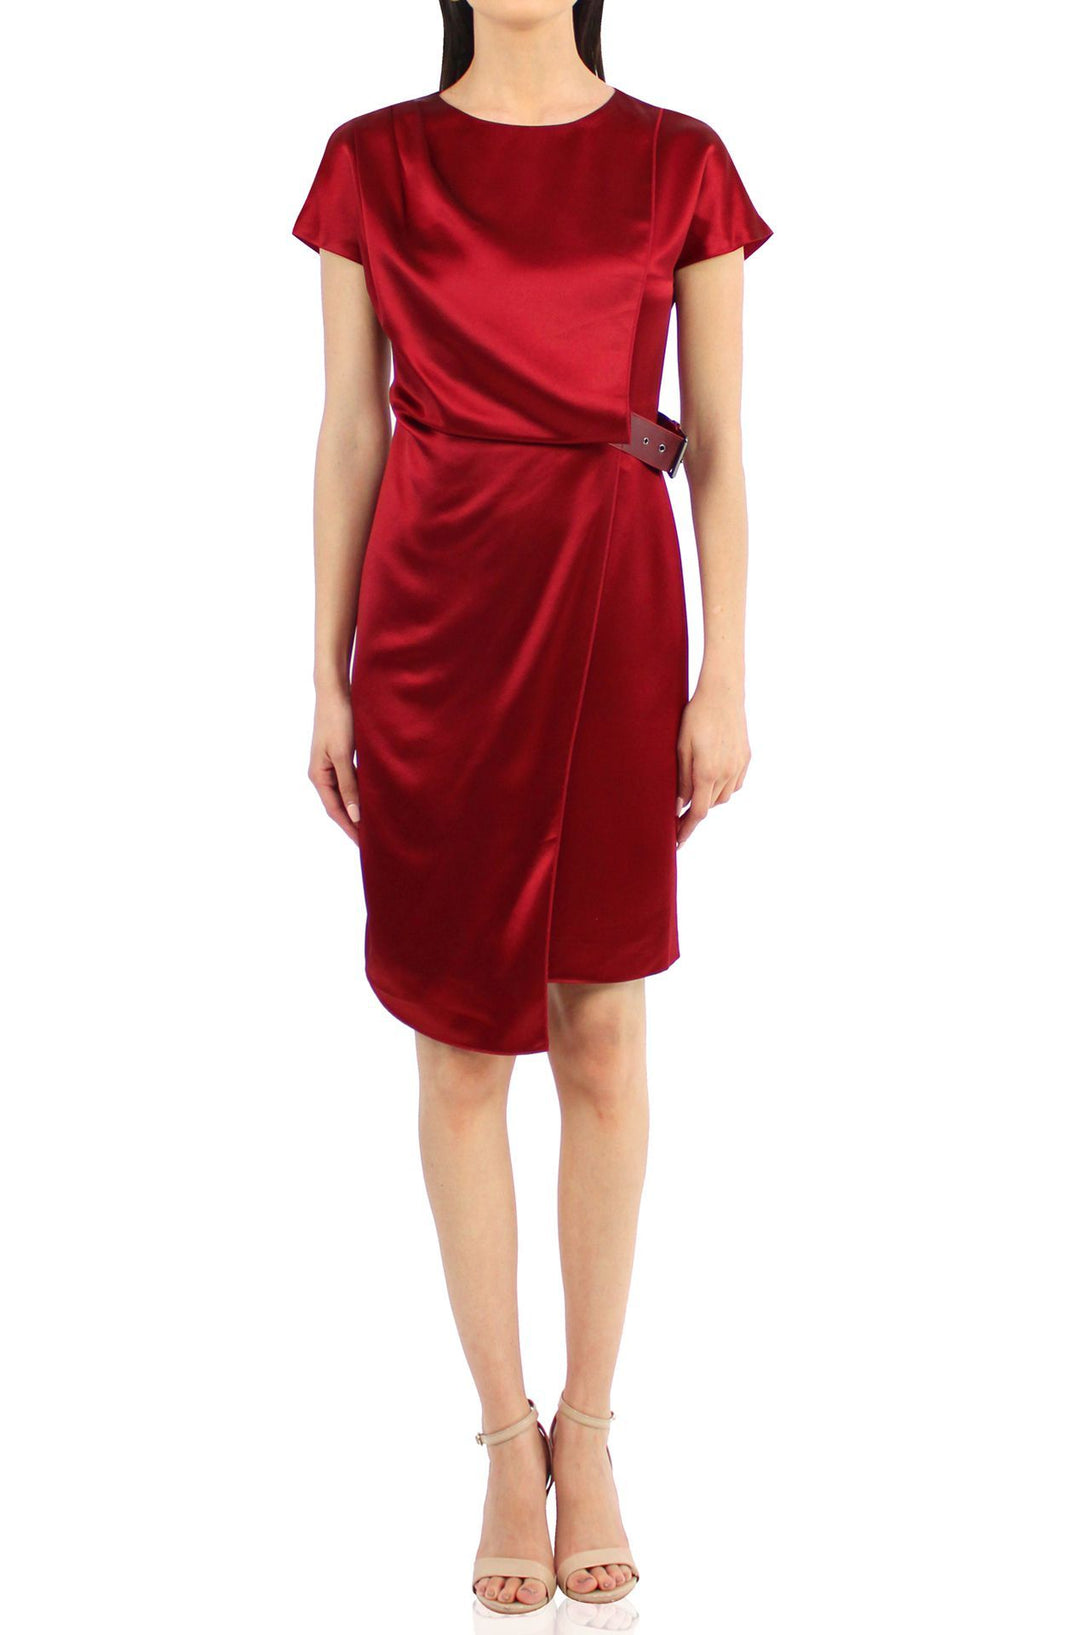 Designer-Mini-Dress-In-Red-By-Kyle